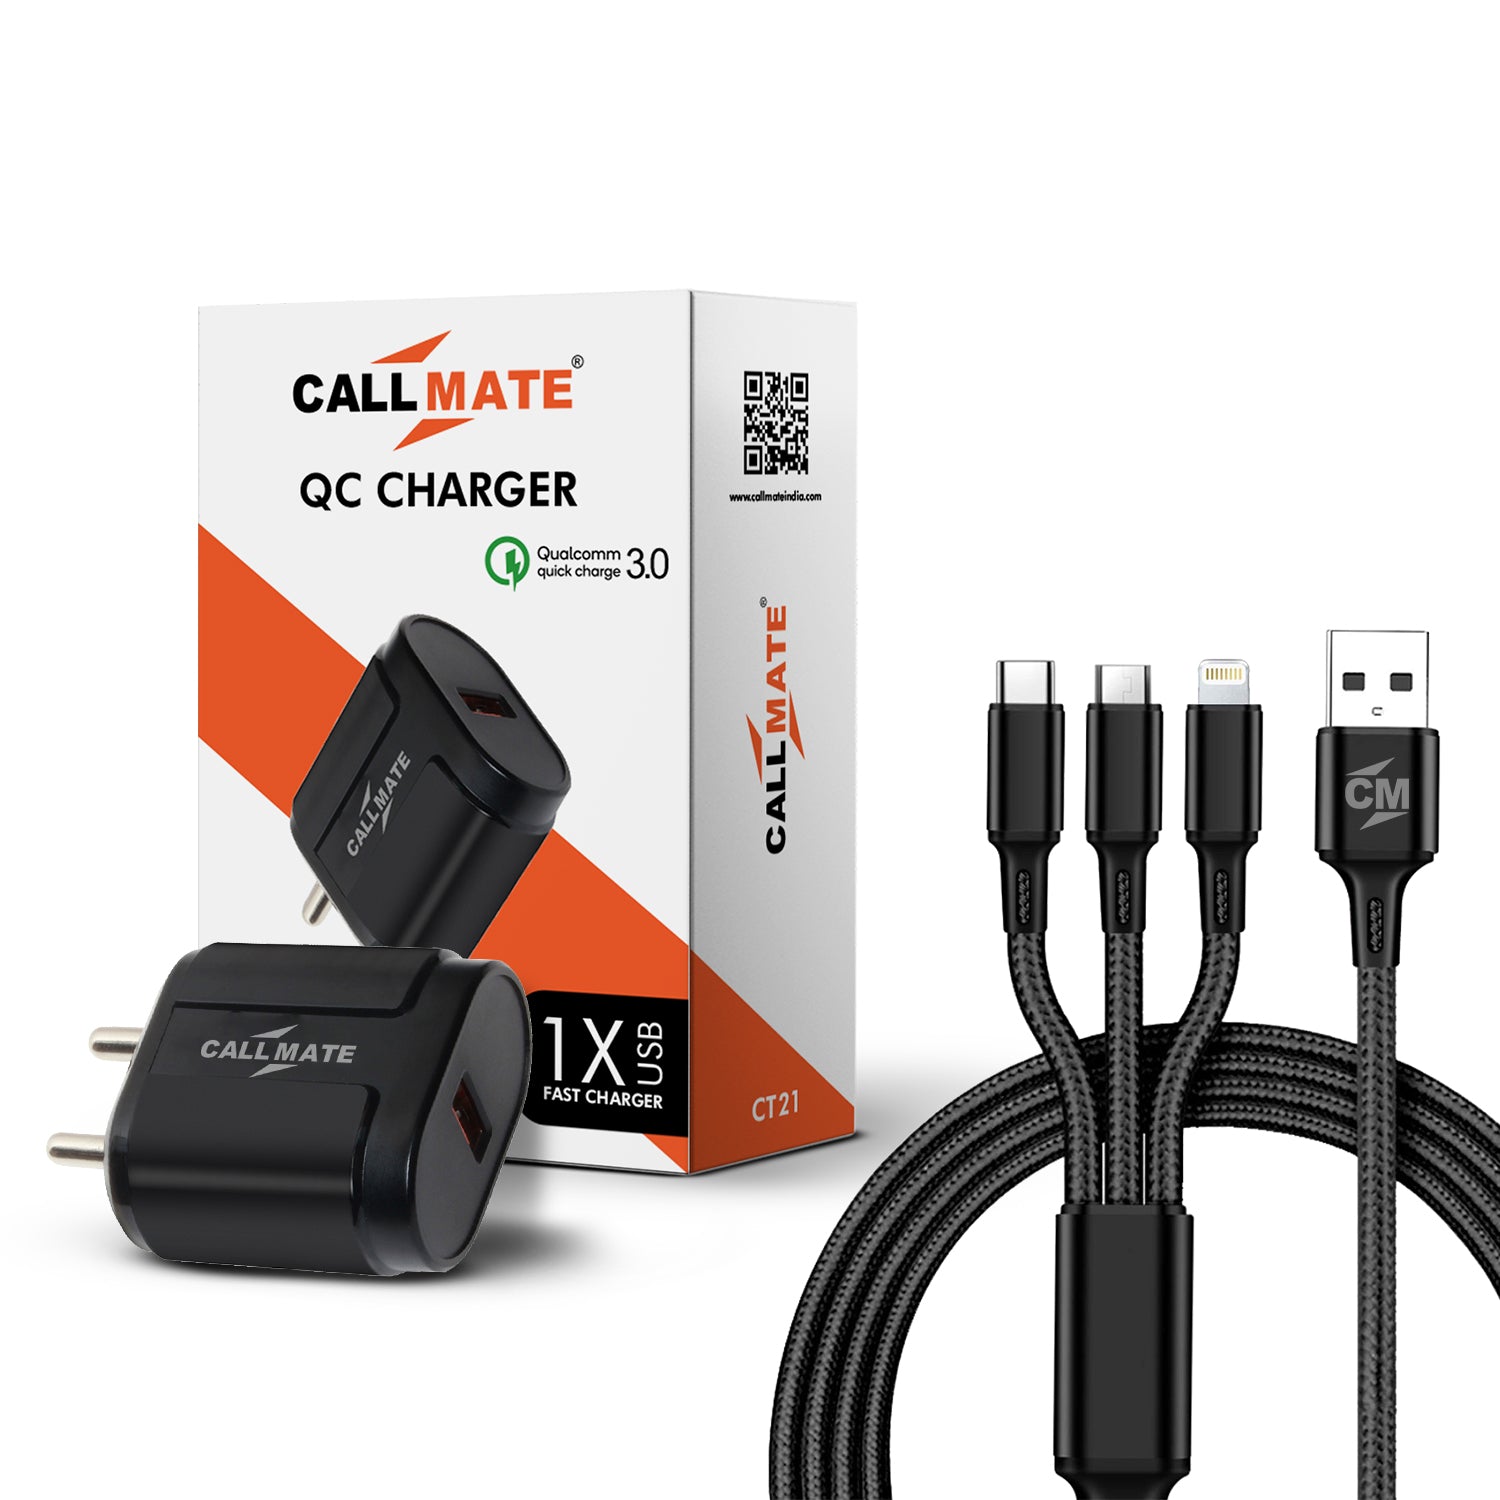 CT 21 18W QC Wall Fast Charger, 3.1A with 60W 4 in 1 Cable